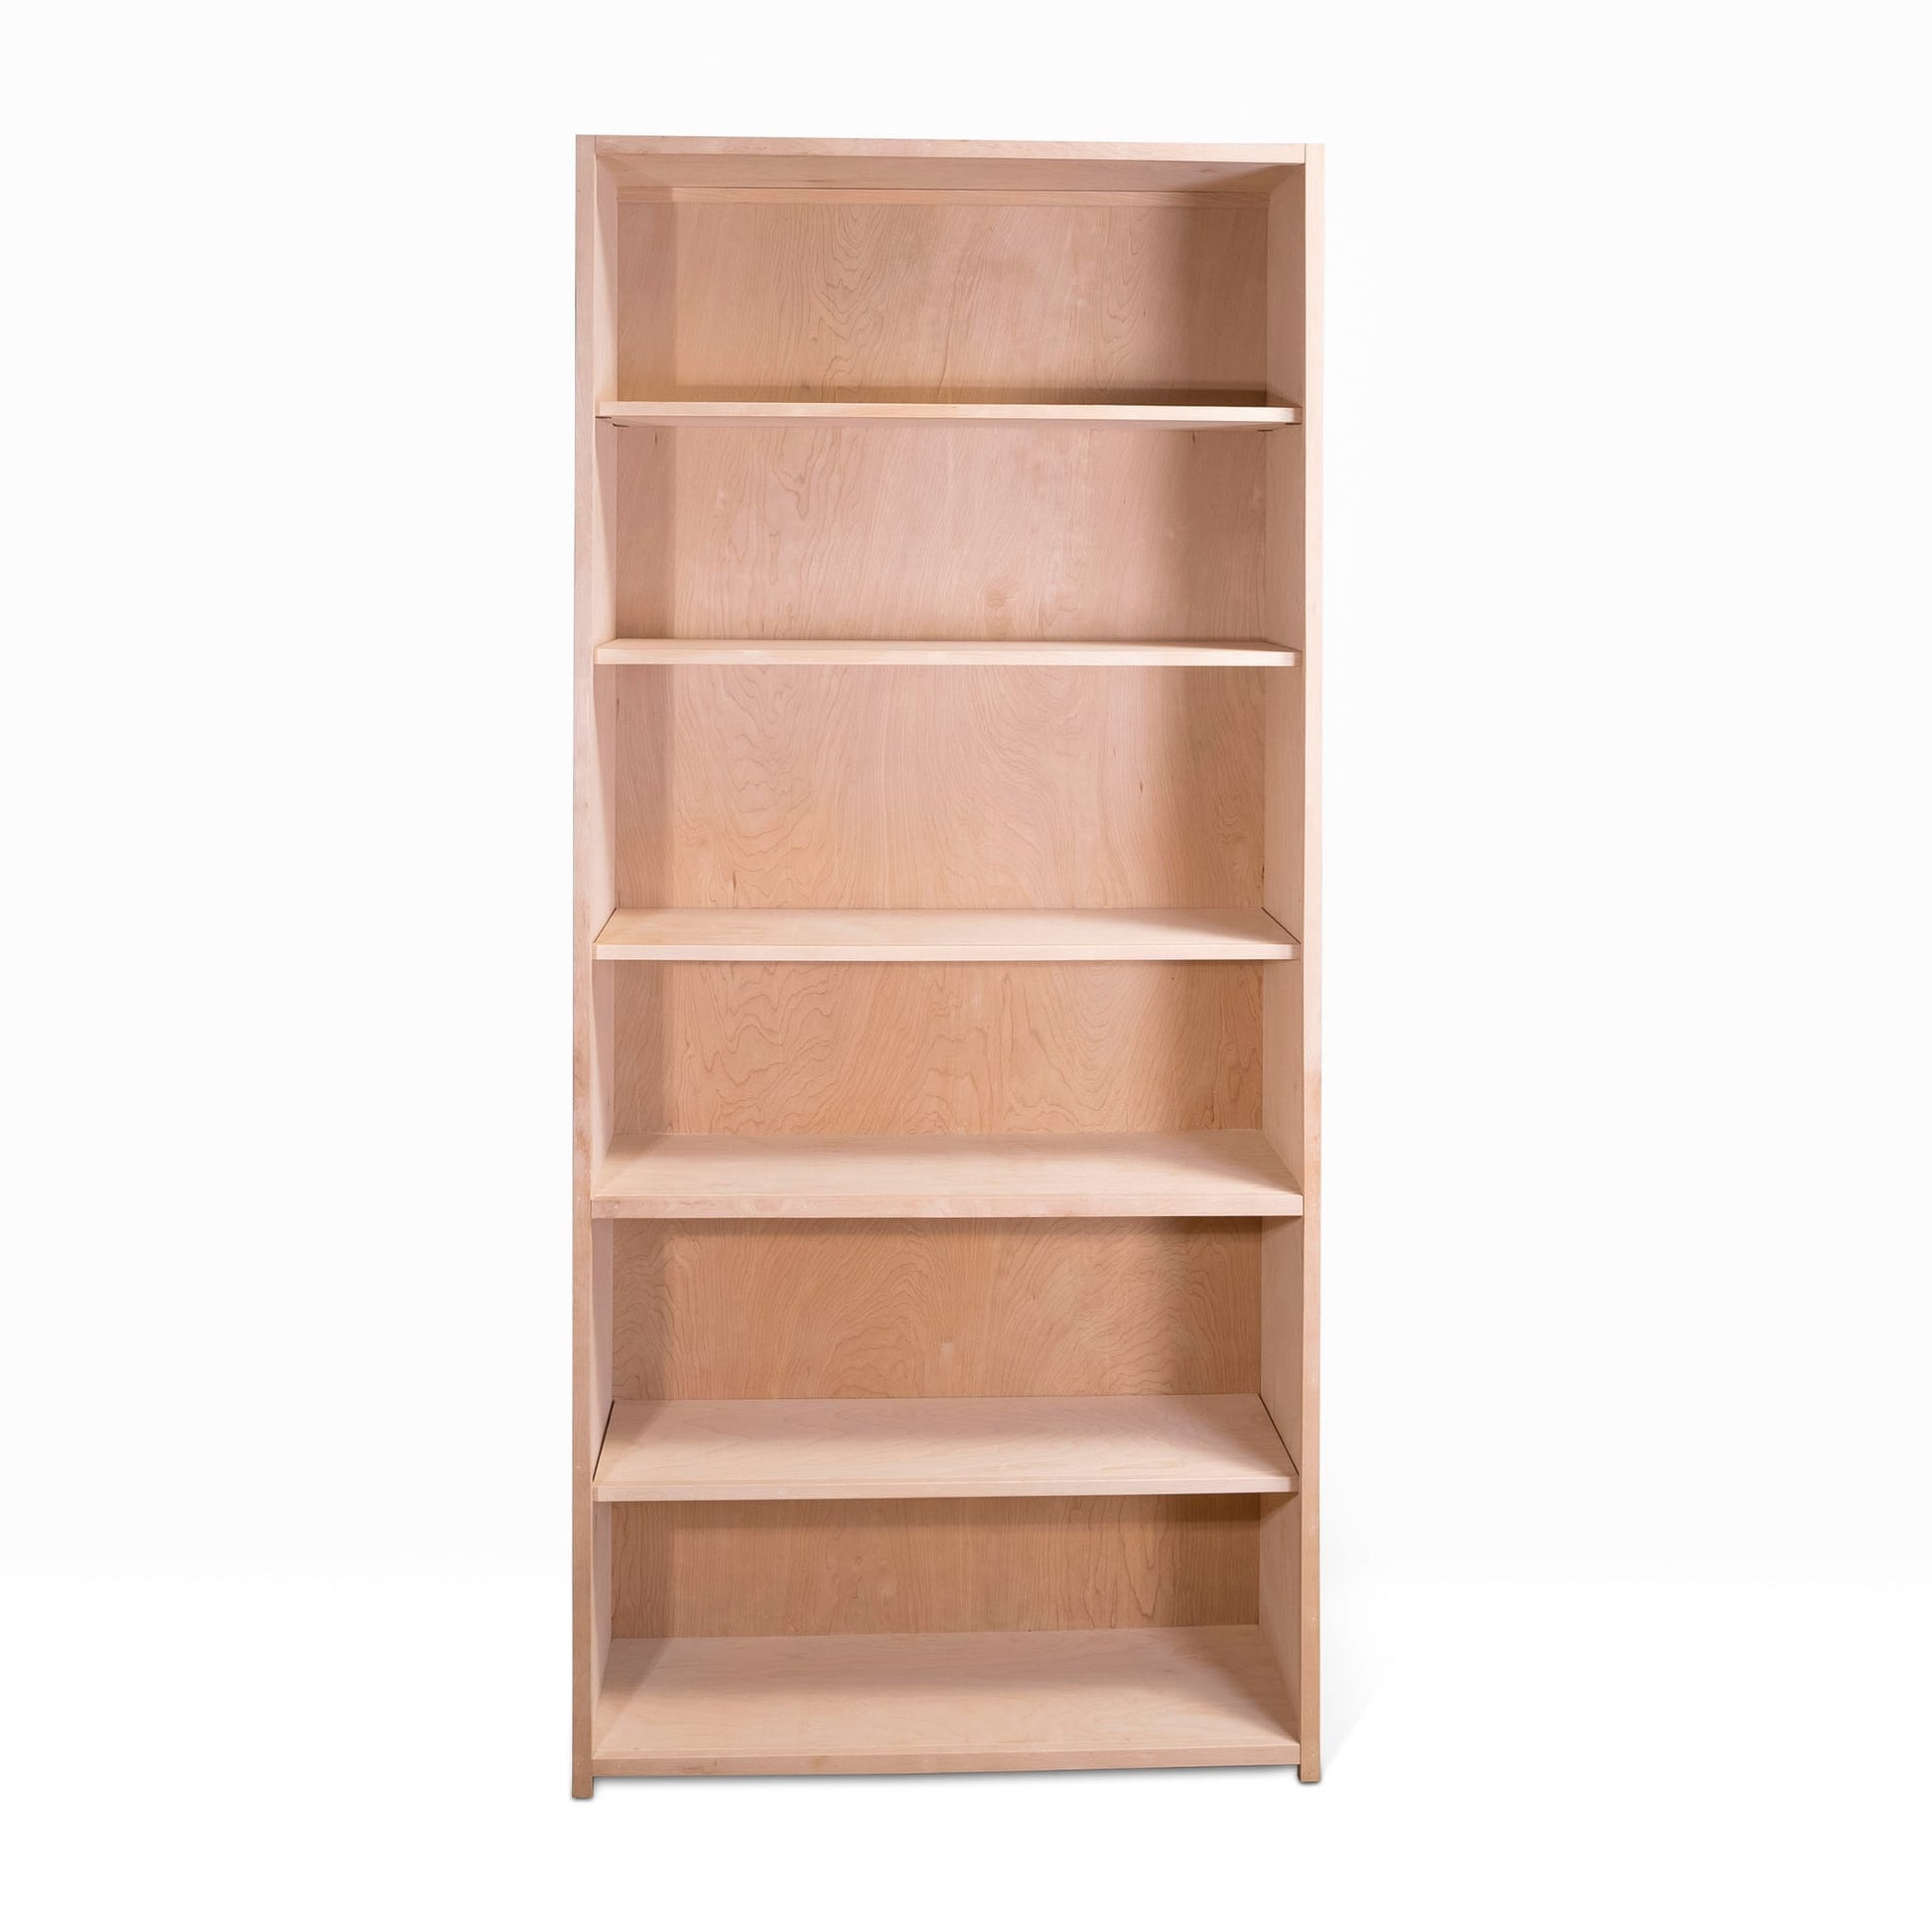 Berkshire Traditional Bookcase is constructed from hardwood birch and shown unfinished with adjustable shelves.